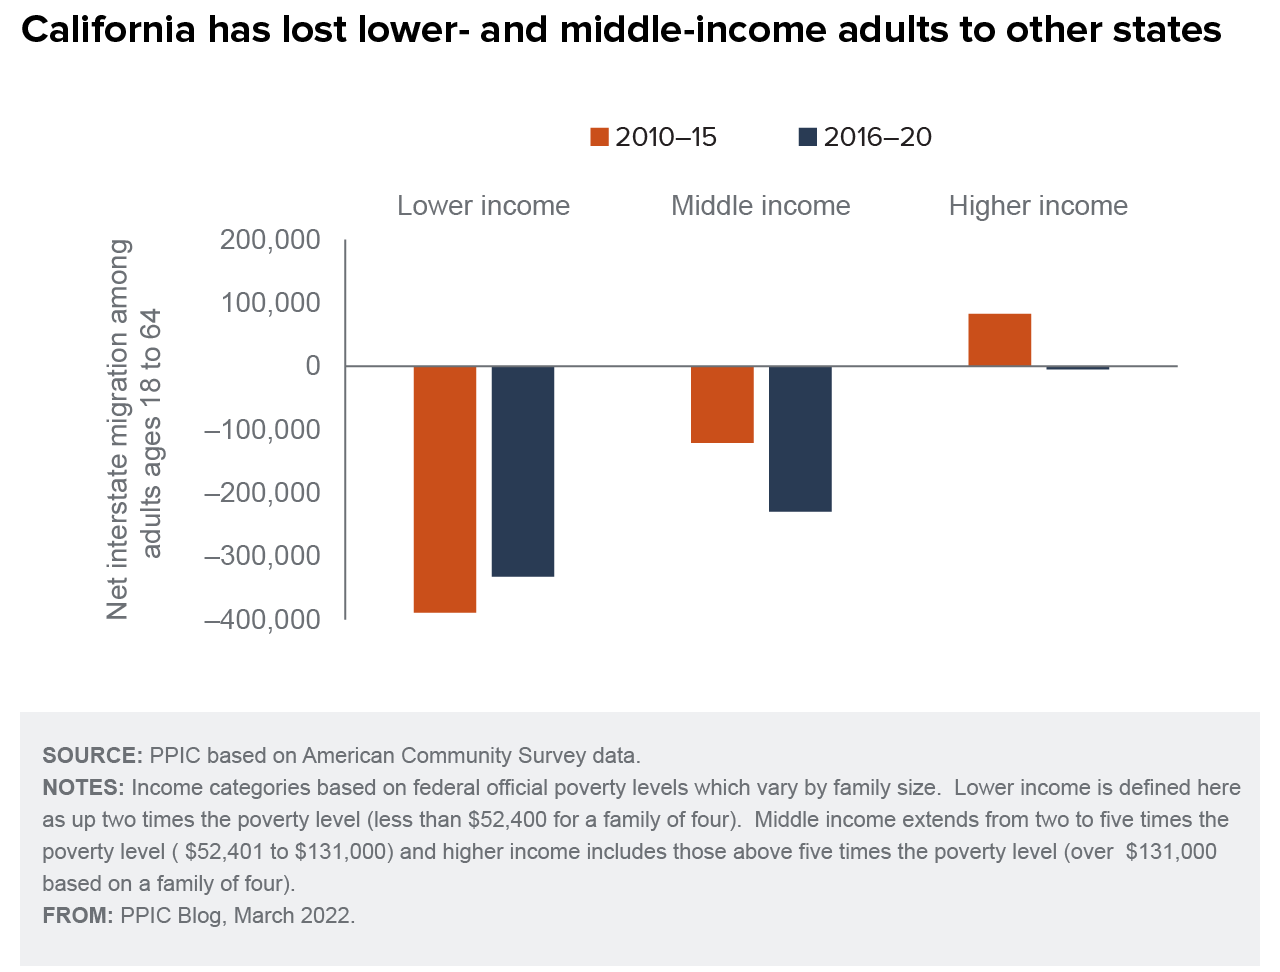 figure - California has lost lower- and middle-income adults to other states